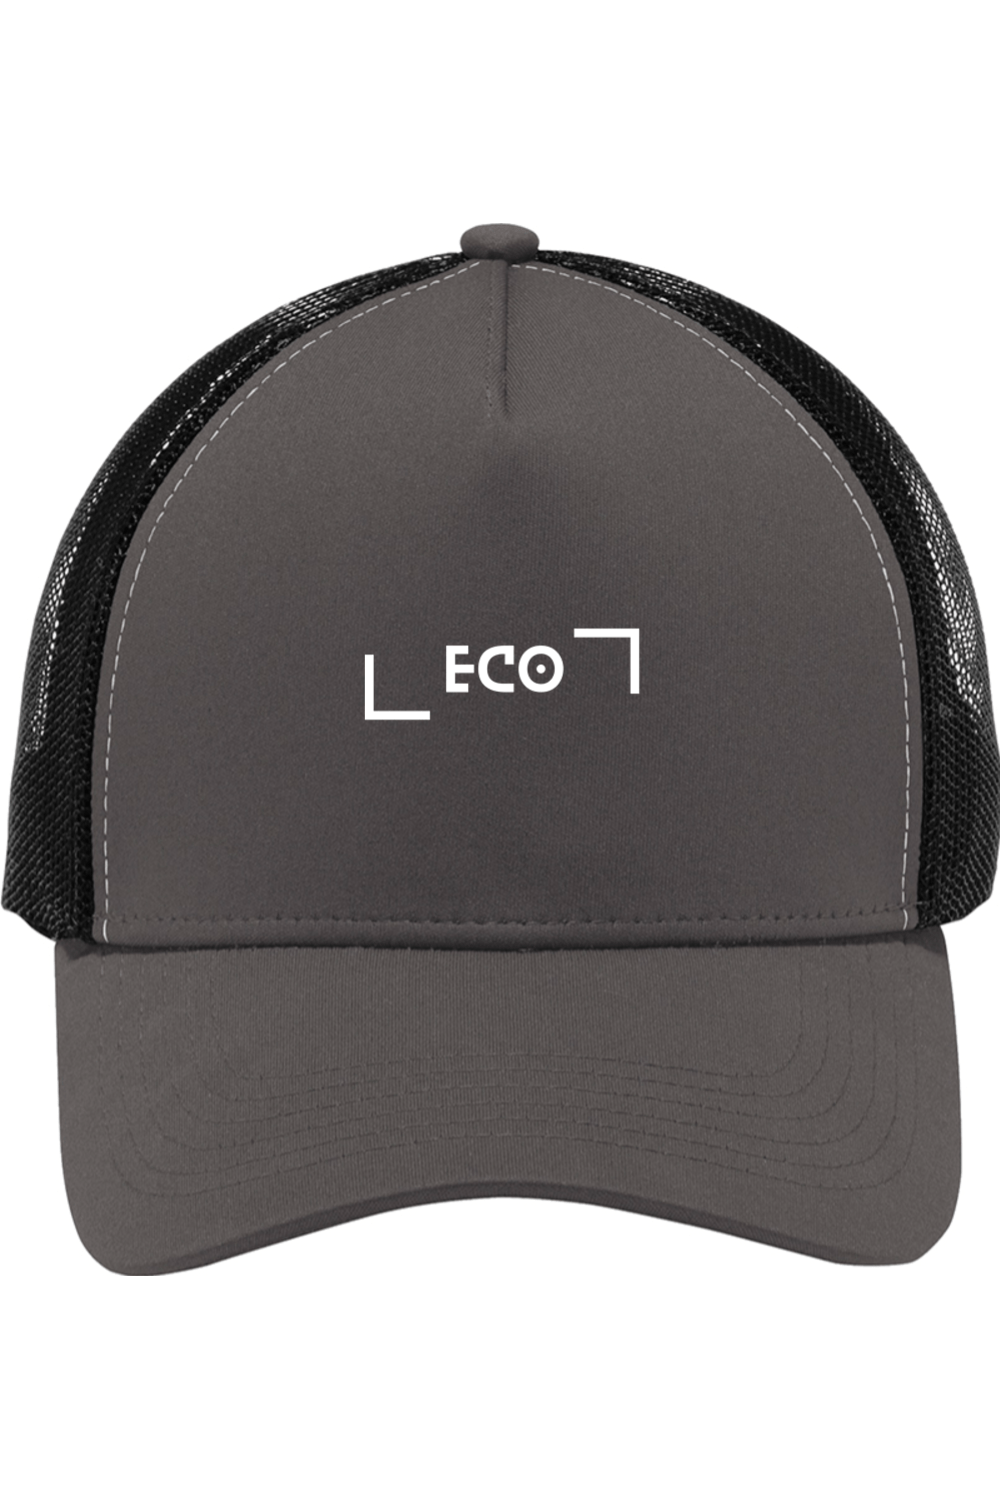 "Eco" PosiCharge Competitor Mesh Back Cap